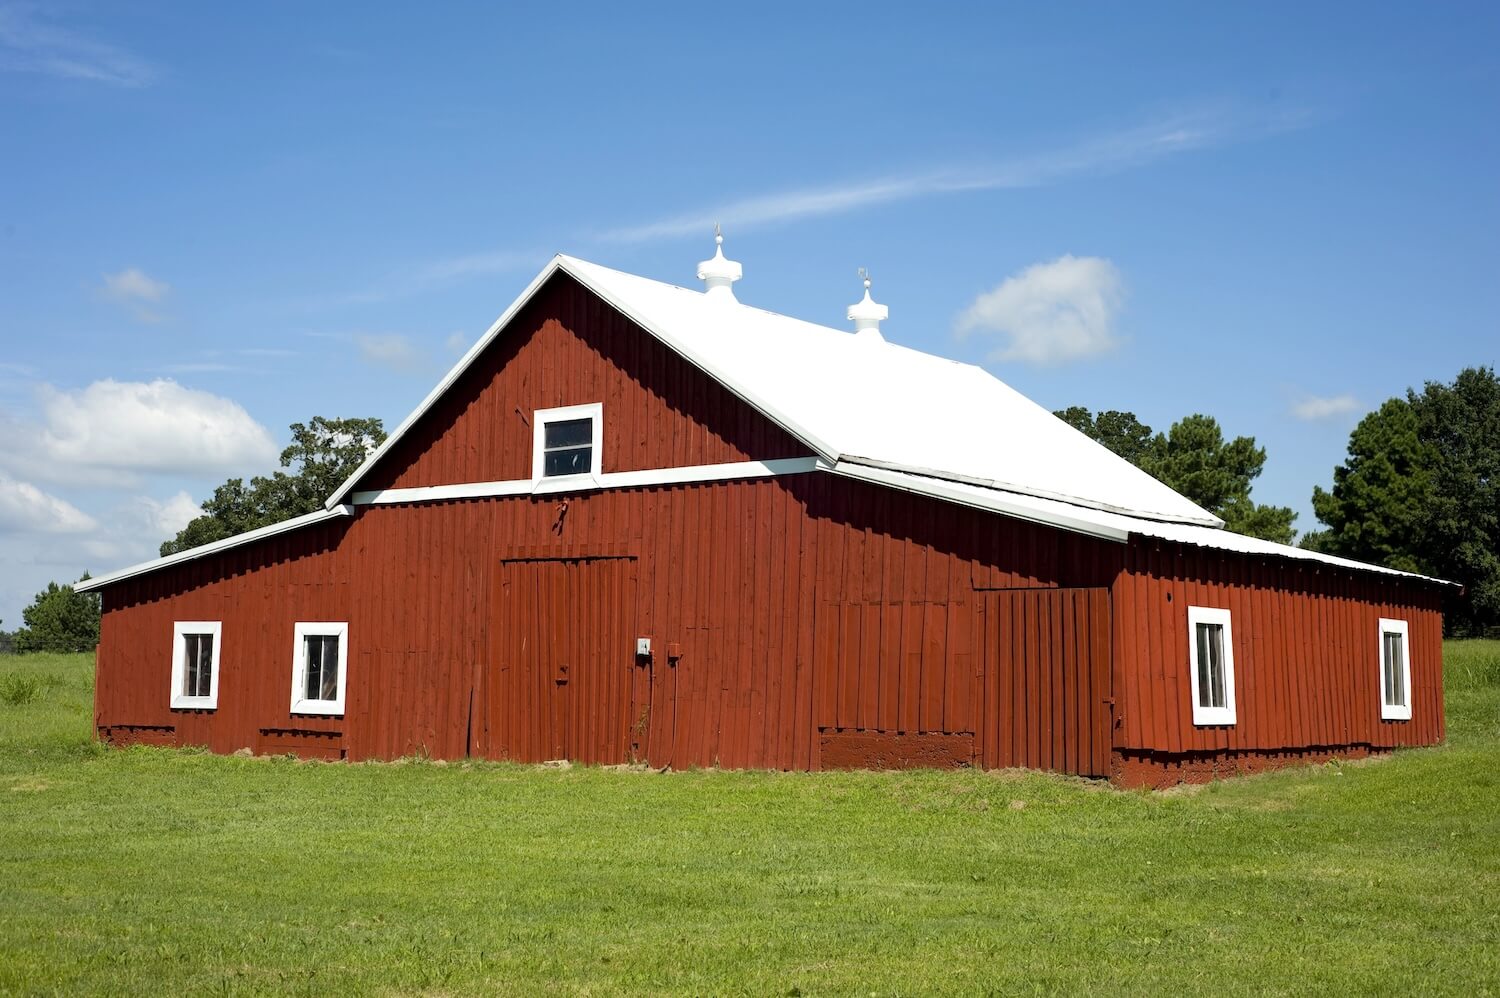 Uncover The Benefits Why Pole Barn Insulation Is A Smart Investment